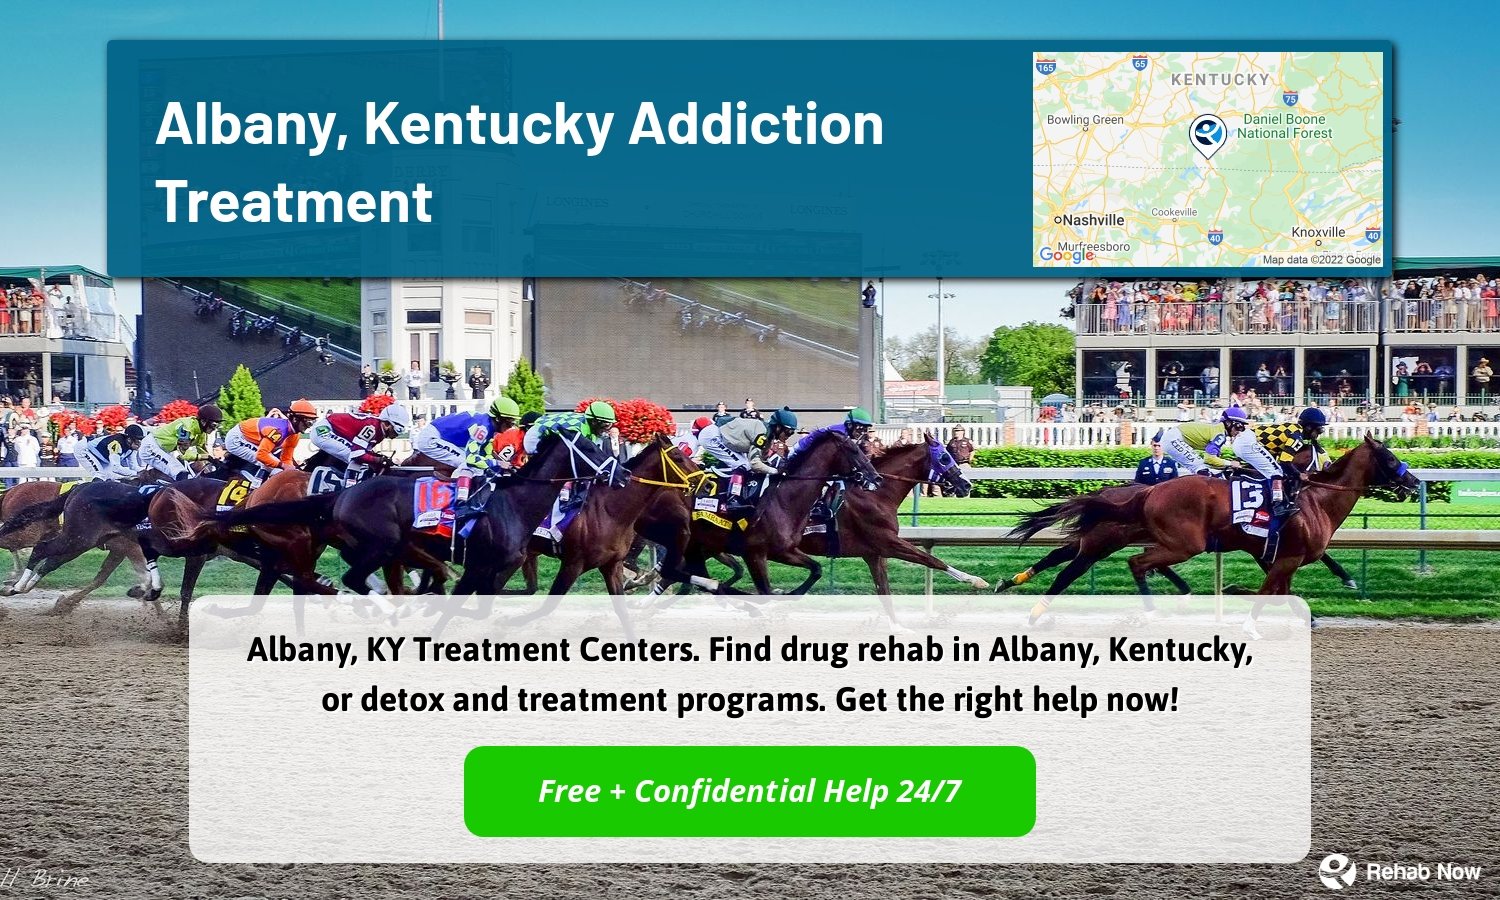 Albany, KY Treatment Centers. Find drug rehab in Albany, Kentucky, or detox and treatment programs. Get the right help now!